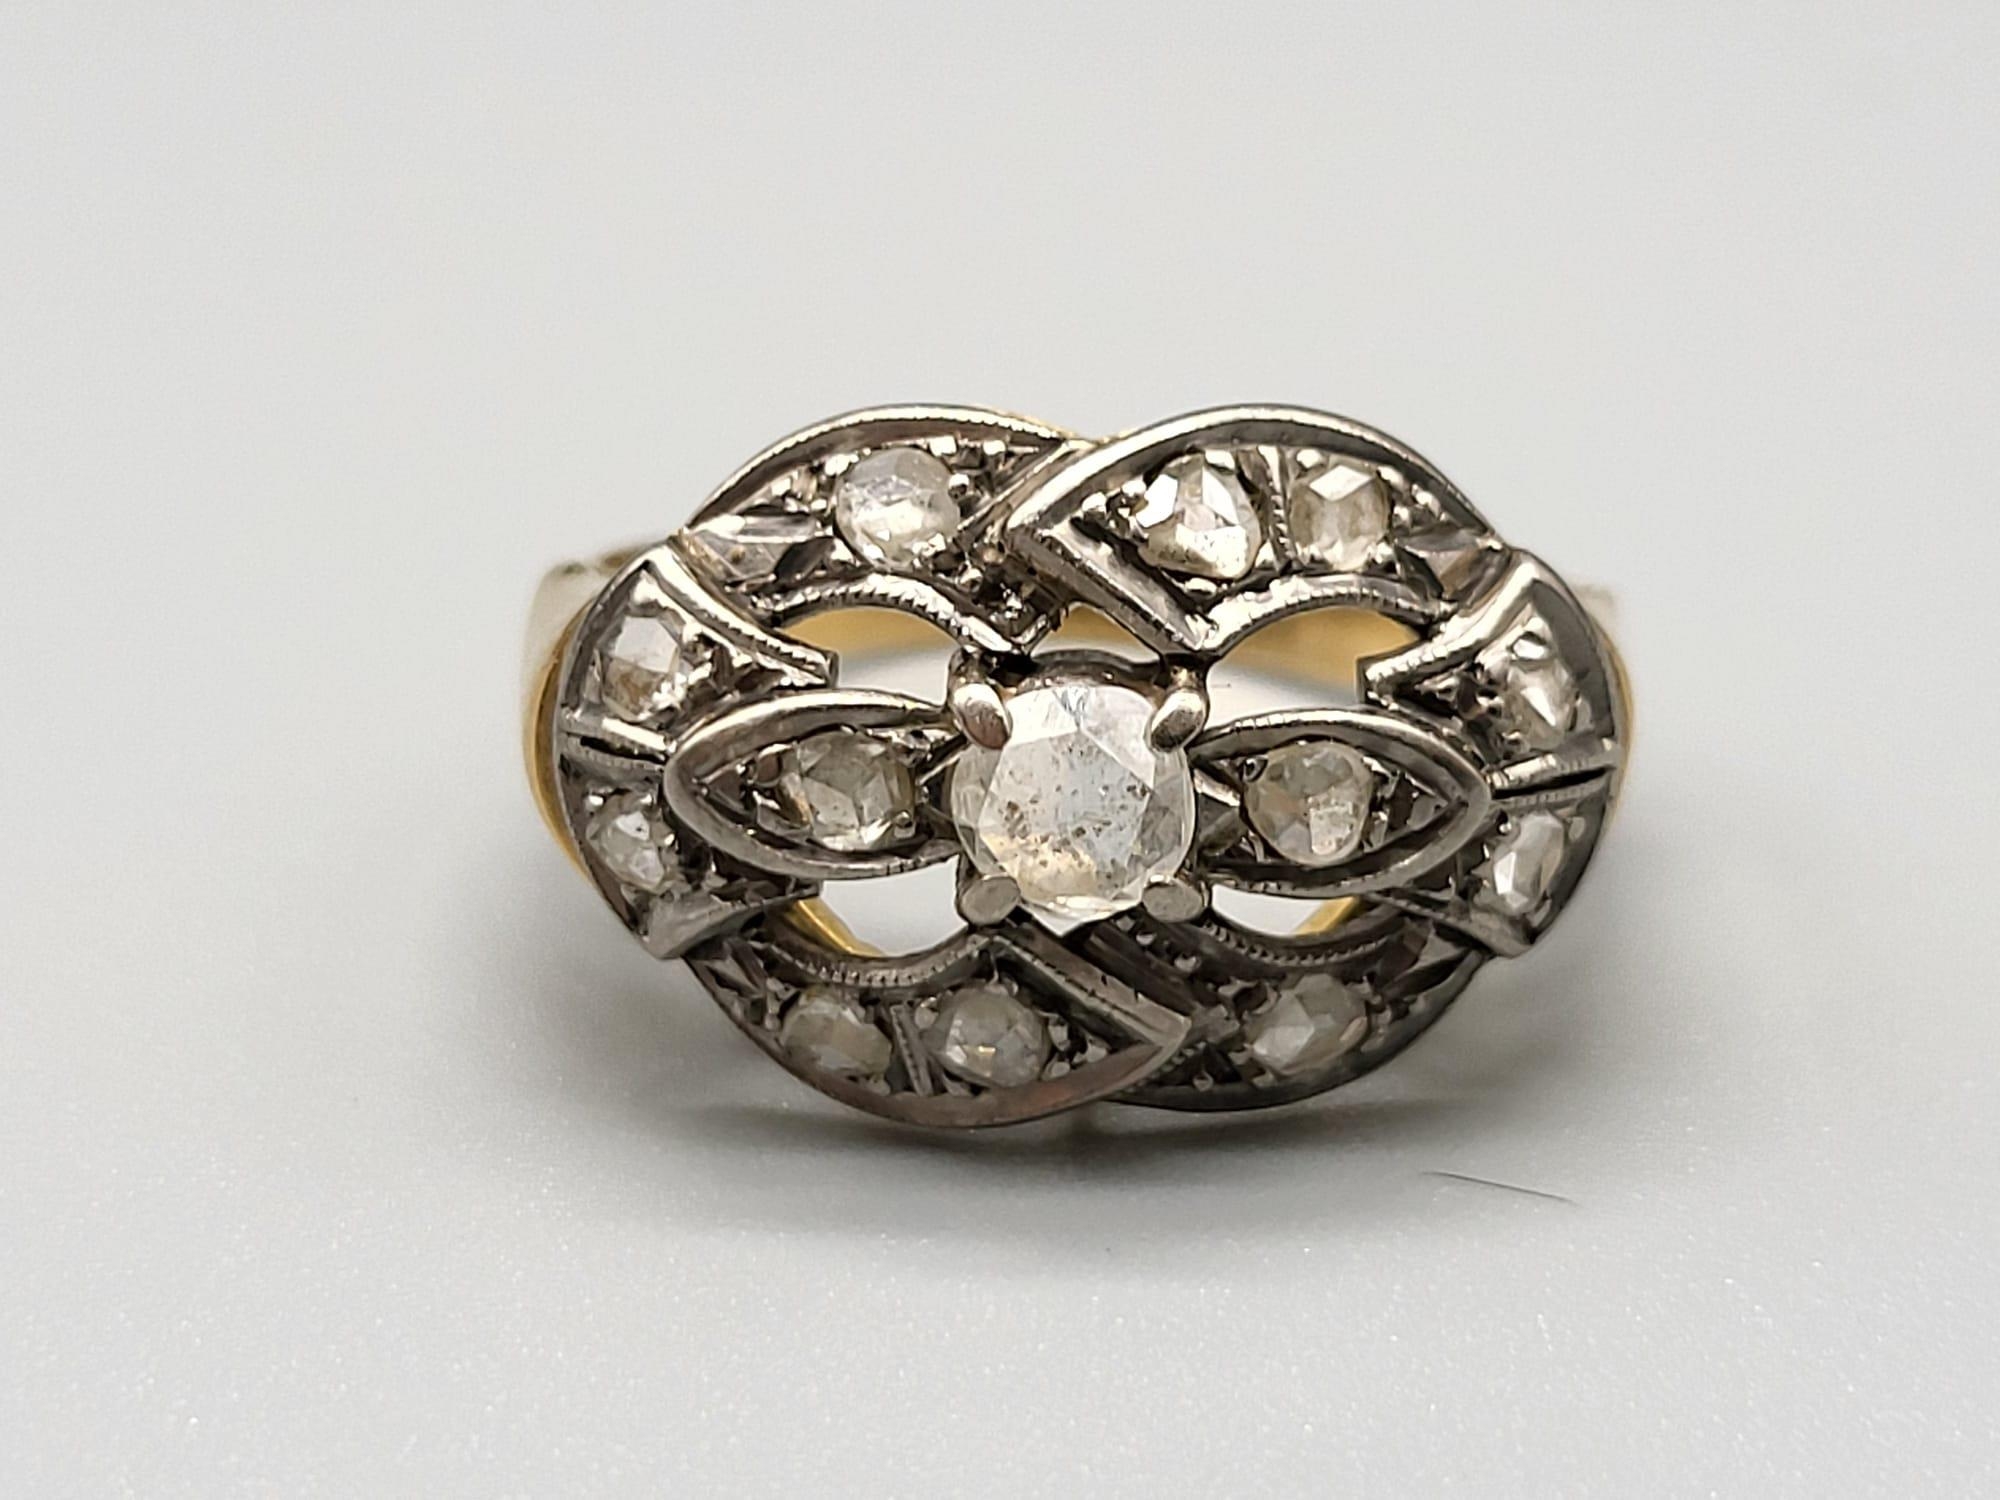 An Art Deco 18 K yellow gold ring with Diamonds. Ring size: M/N, weight: 4.4 g.